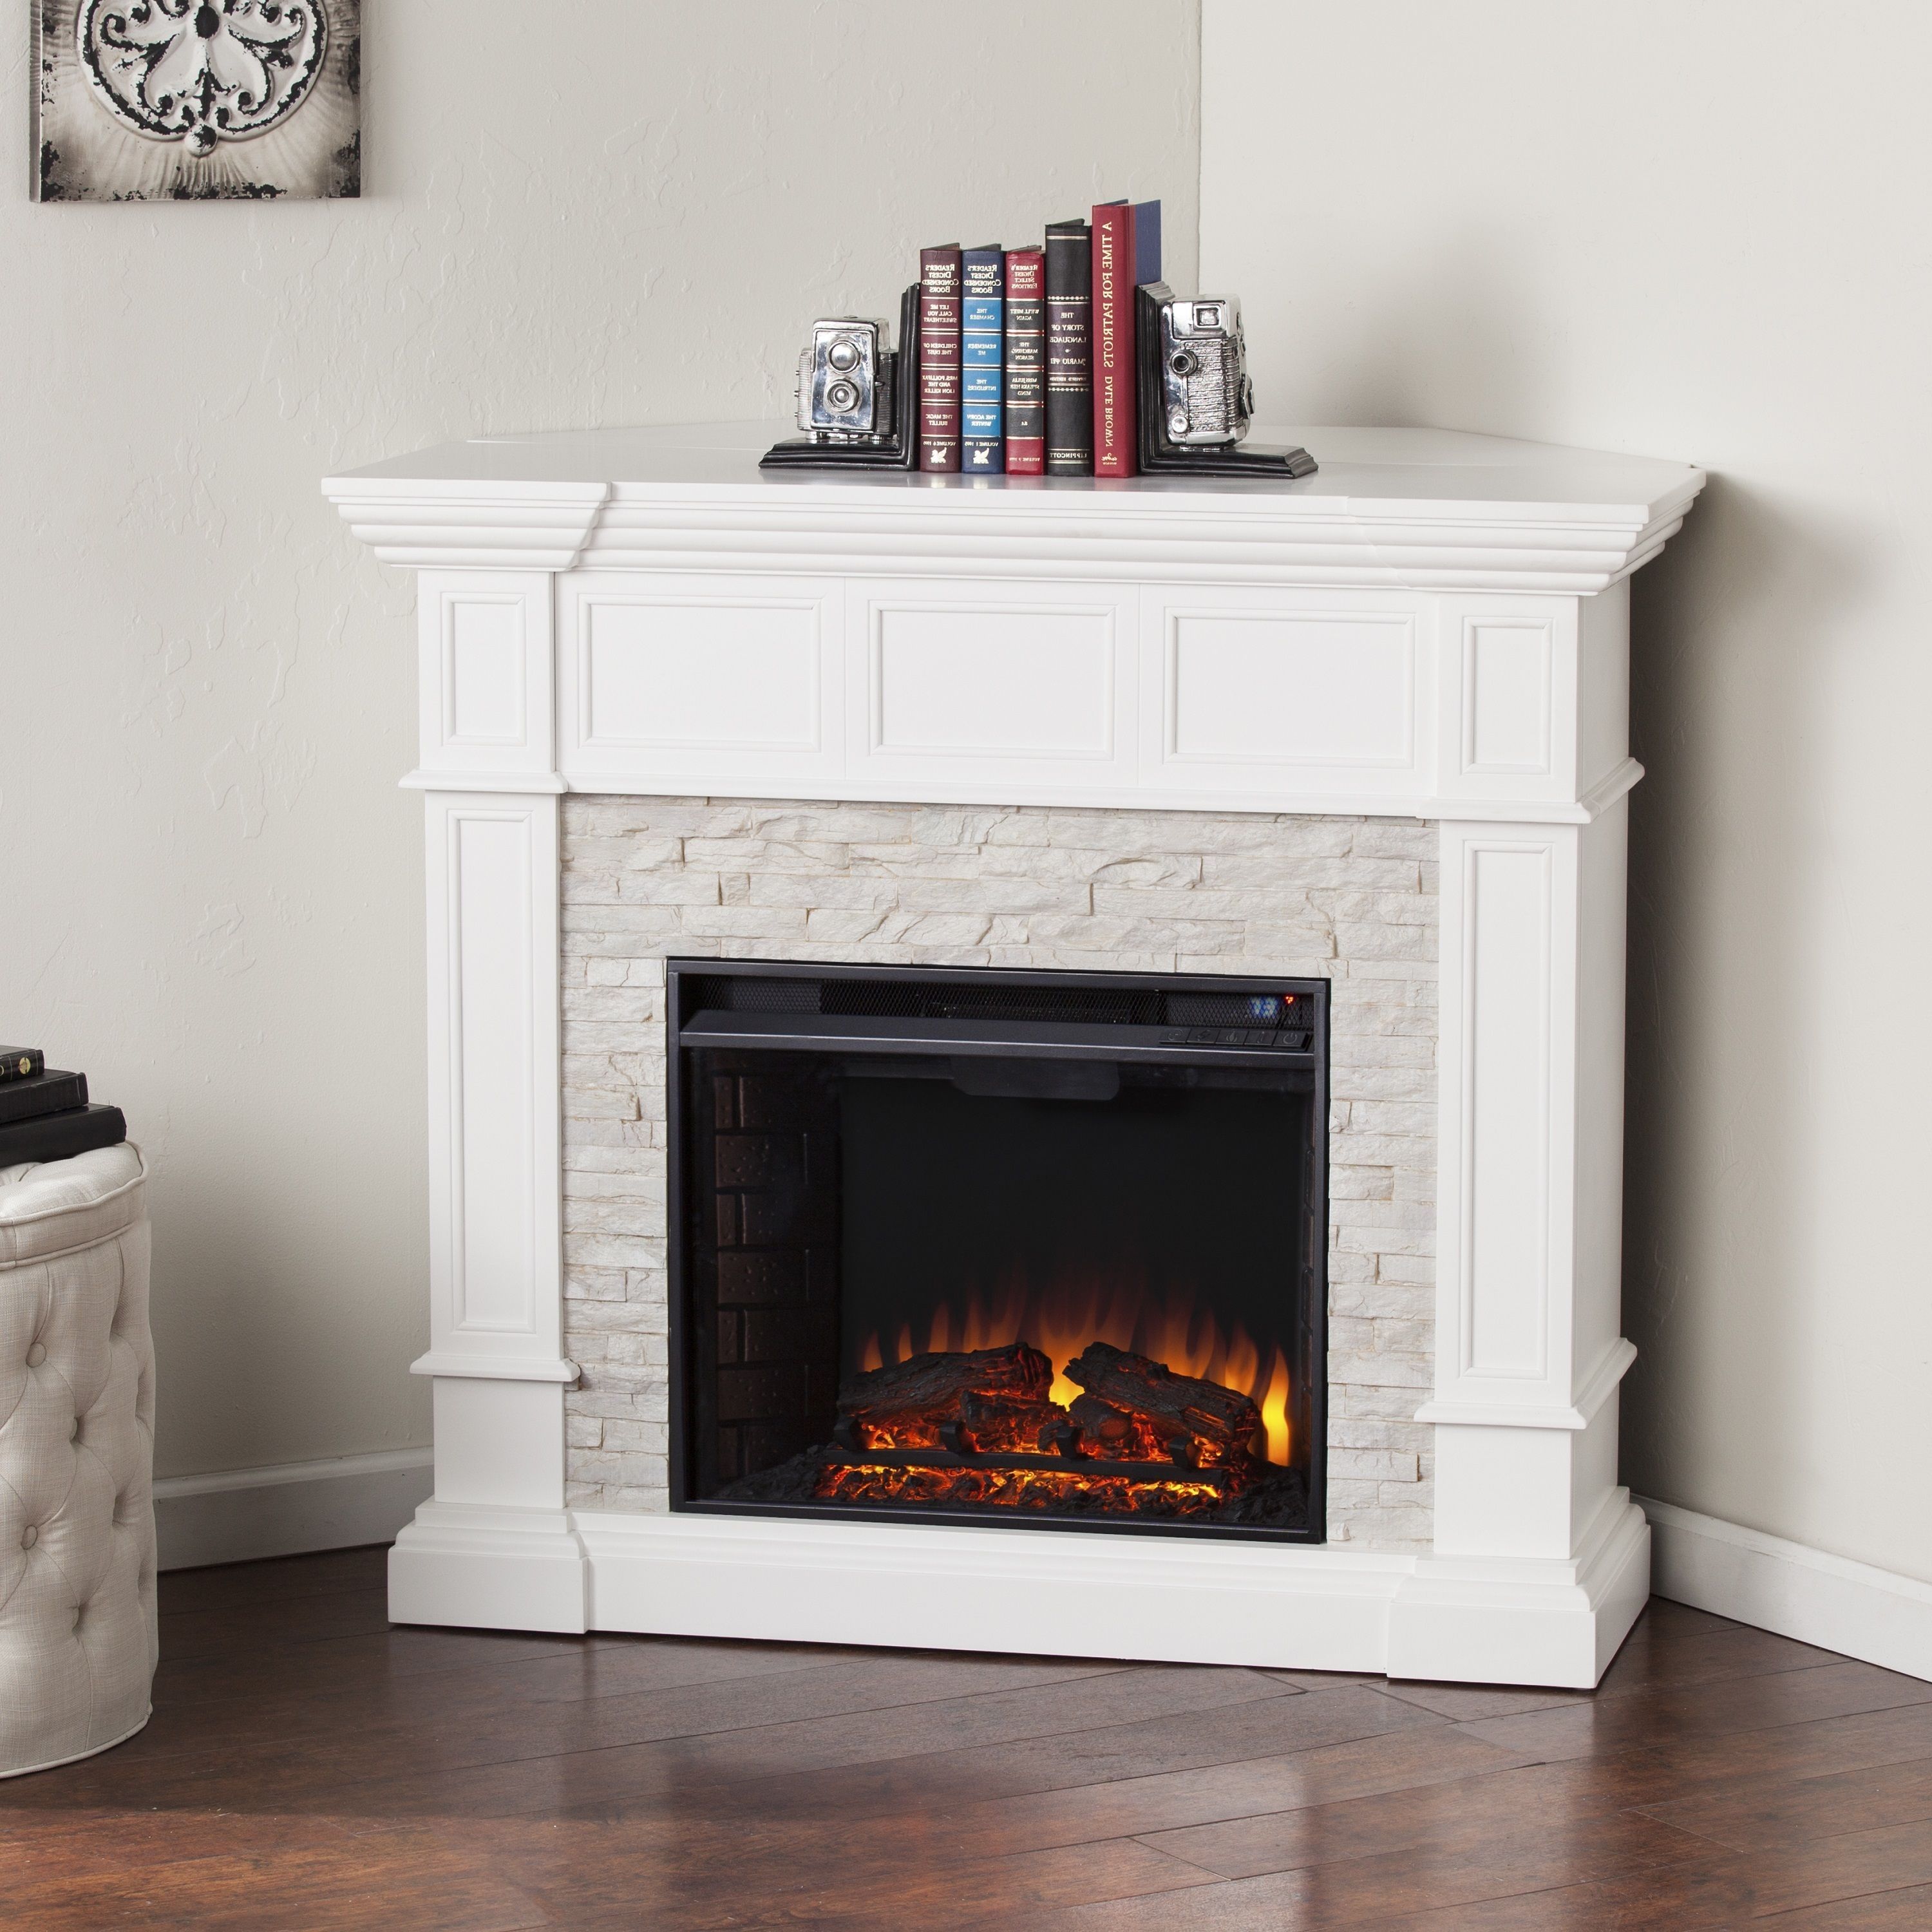 Wayfair Fireplace Inserts New 33 Modern and Traditional Corner Fireplace Ideas Remodel